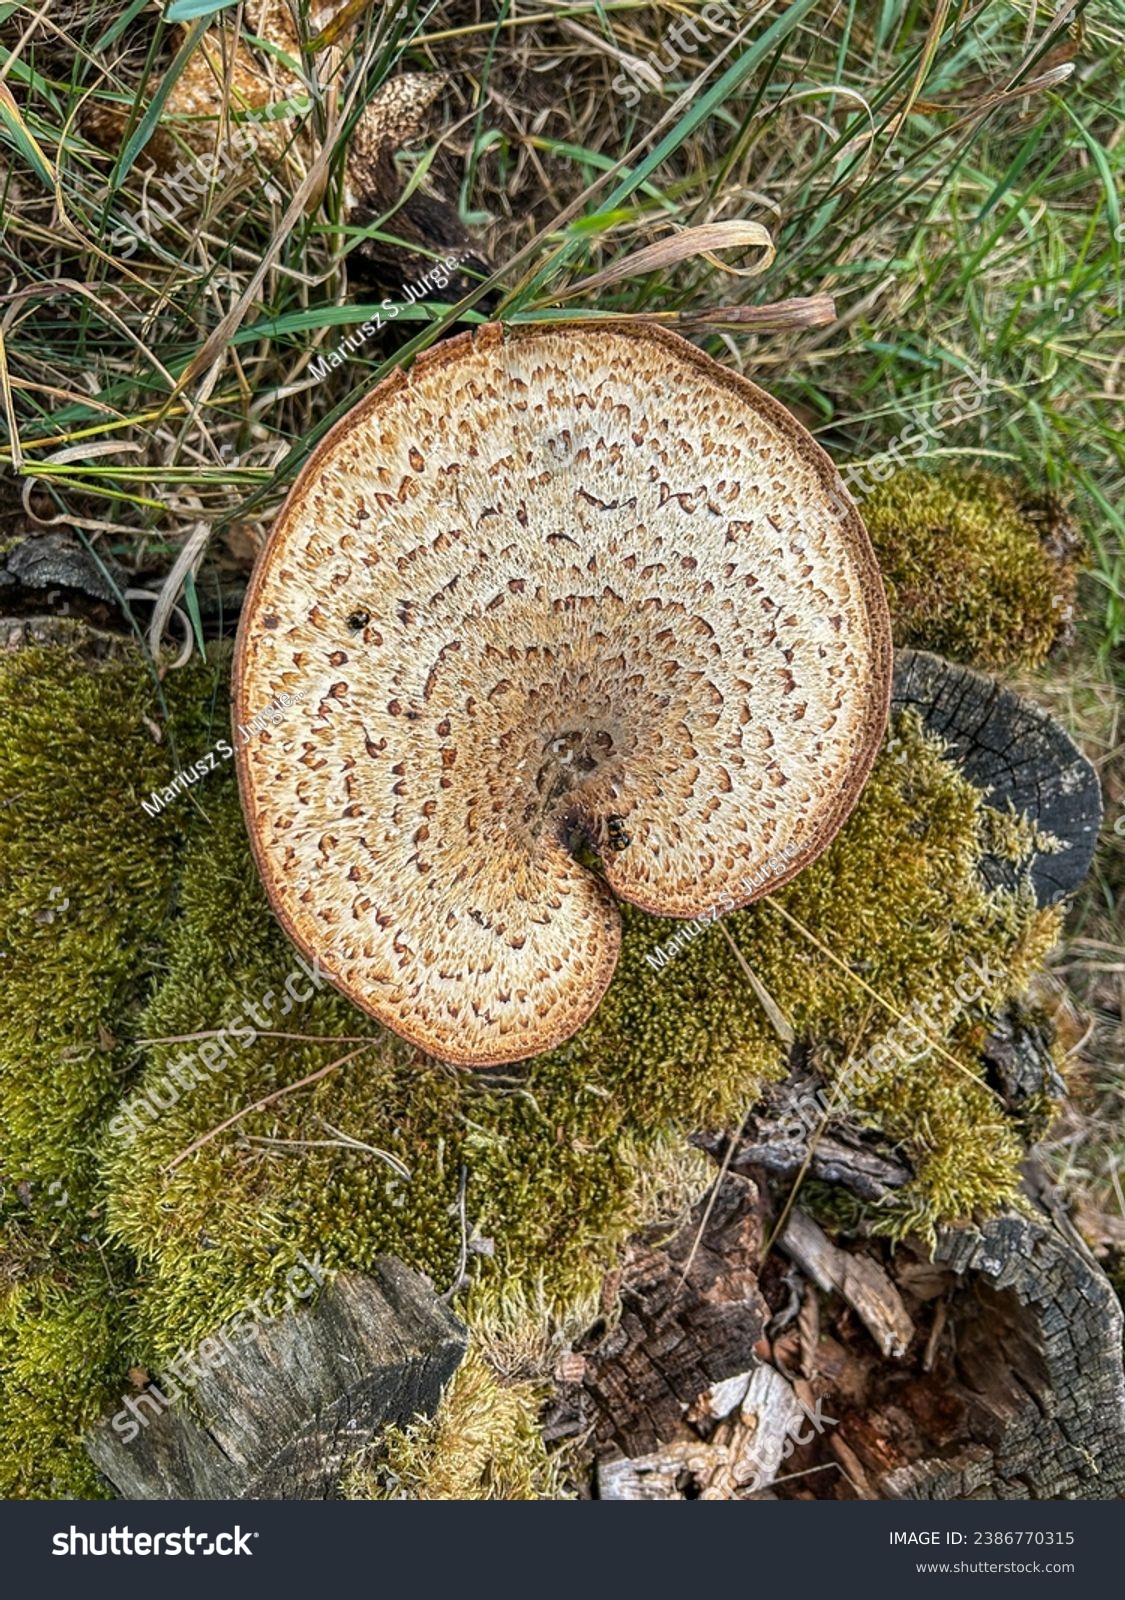 Dryad's saddle (Cerioporus squamosus) is a basidiomycete bracket fungus. It has a widespread distribution, being found in North America, Australia, Asia, and Europe #2386770315